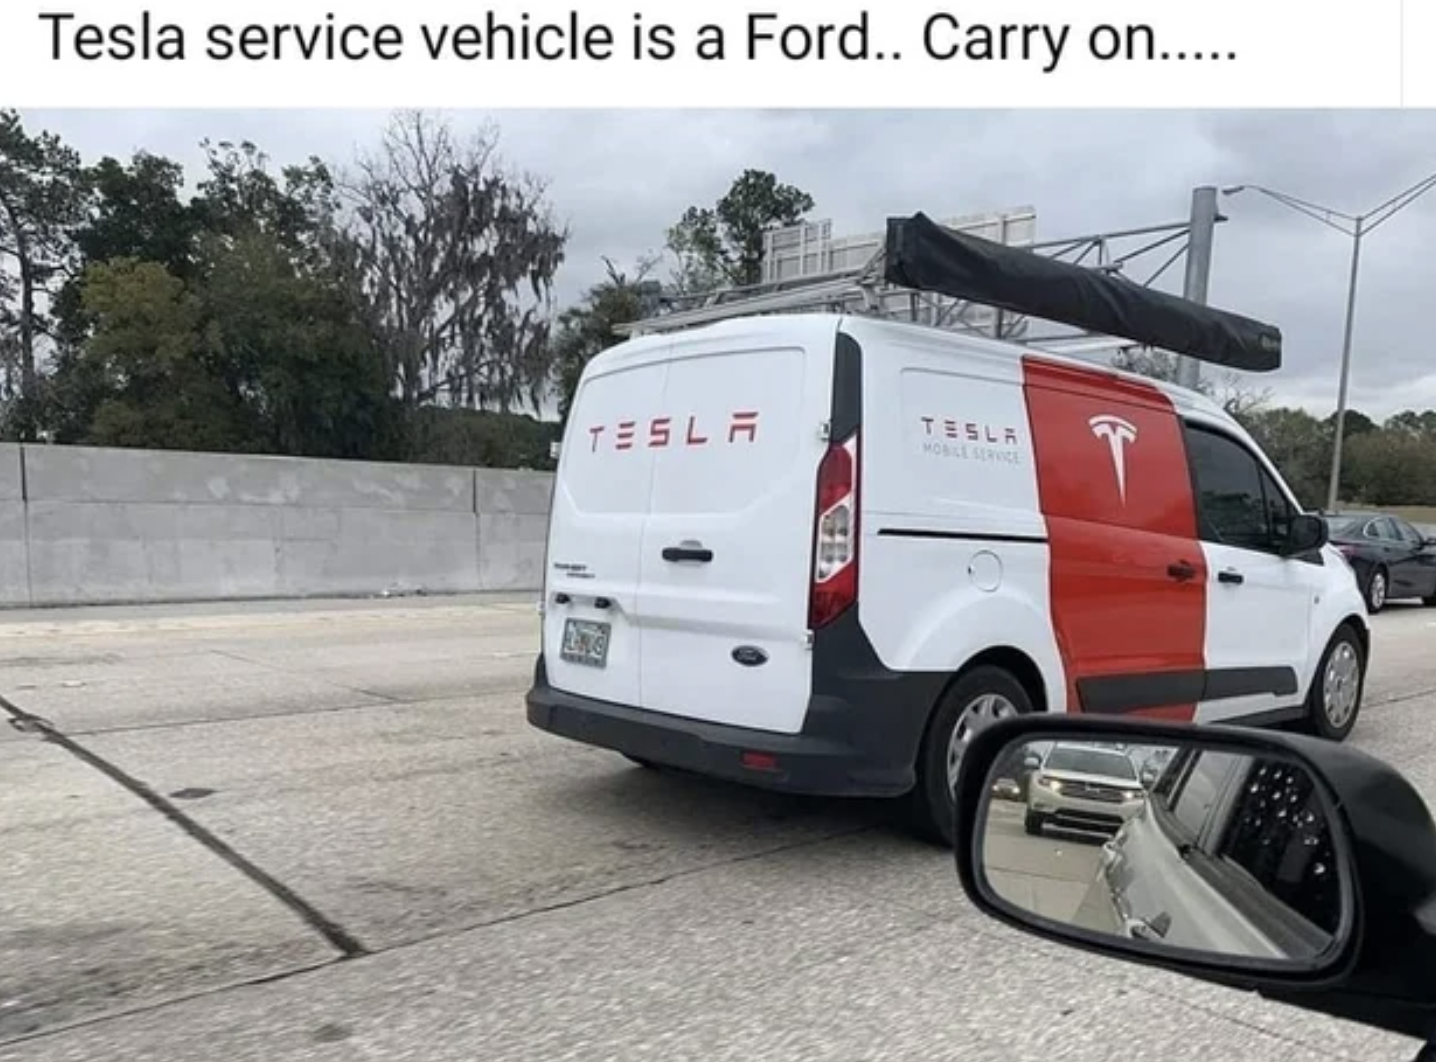 Funny Facepalms - tesla roadside assistance vehicles - Tesla service vehicle is a Ford.. Carry on....